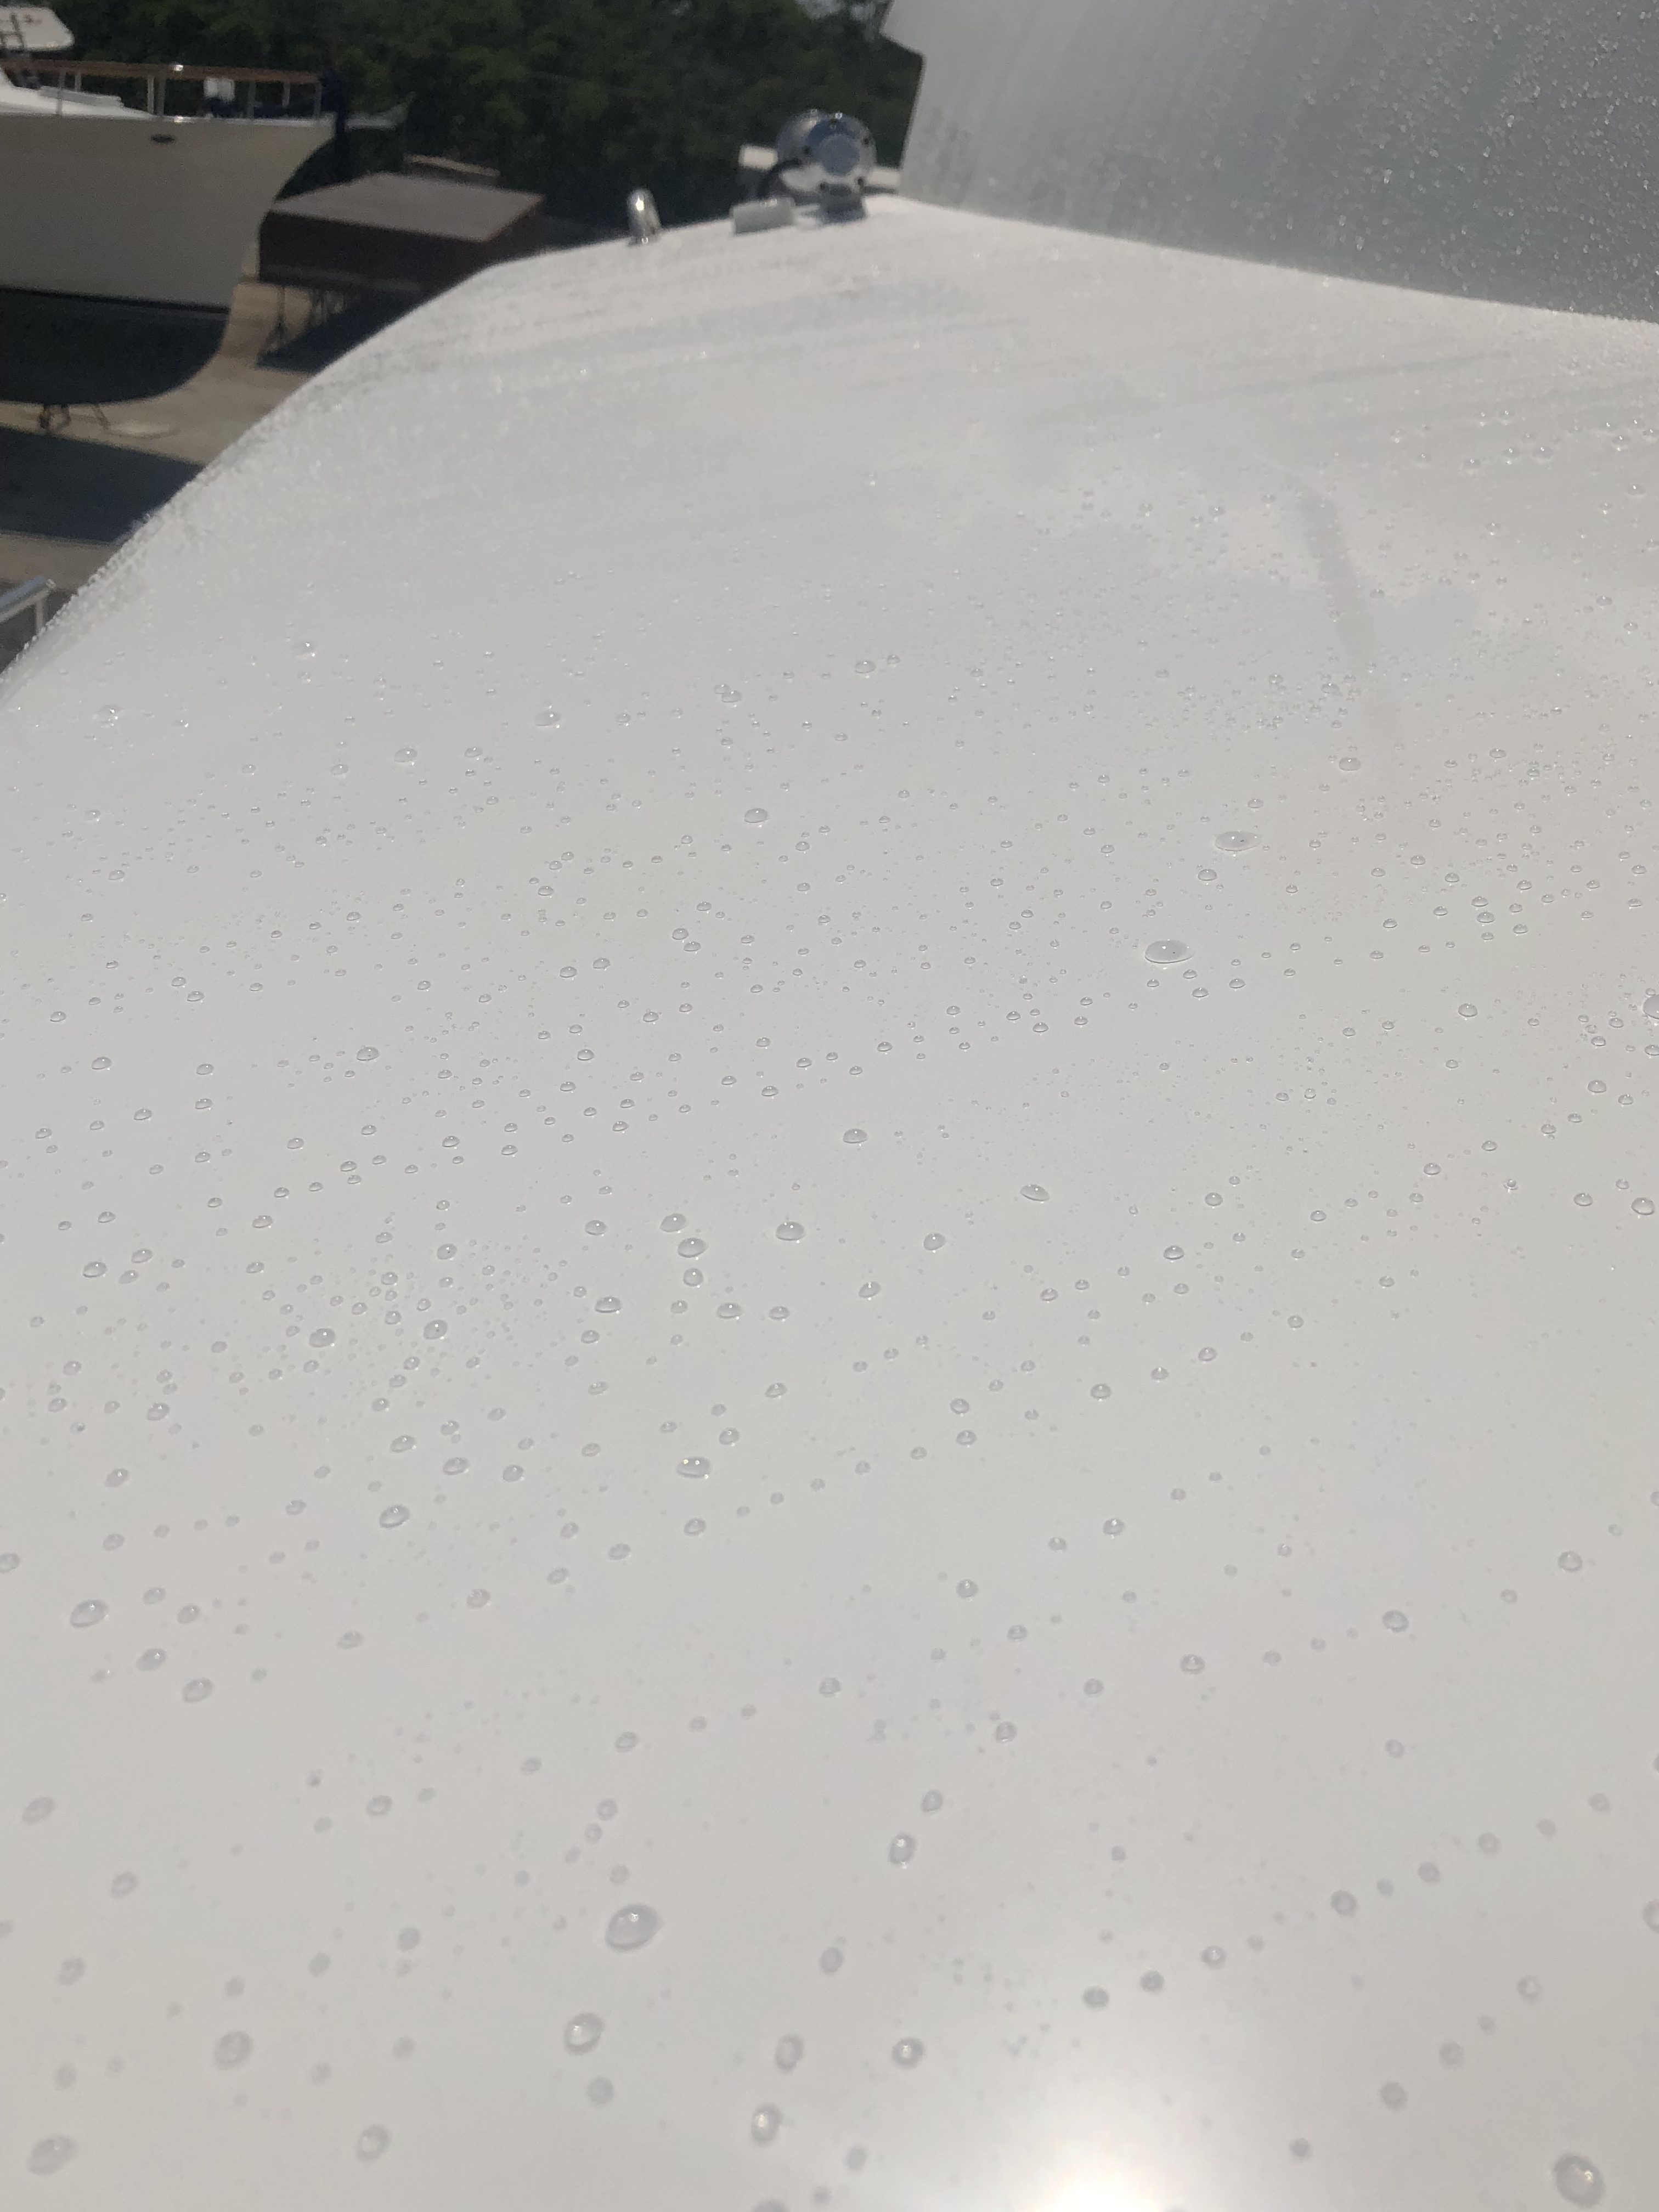 Water beading up after Glidecoat ceramic coating application